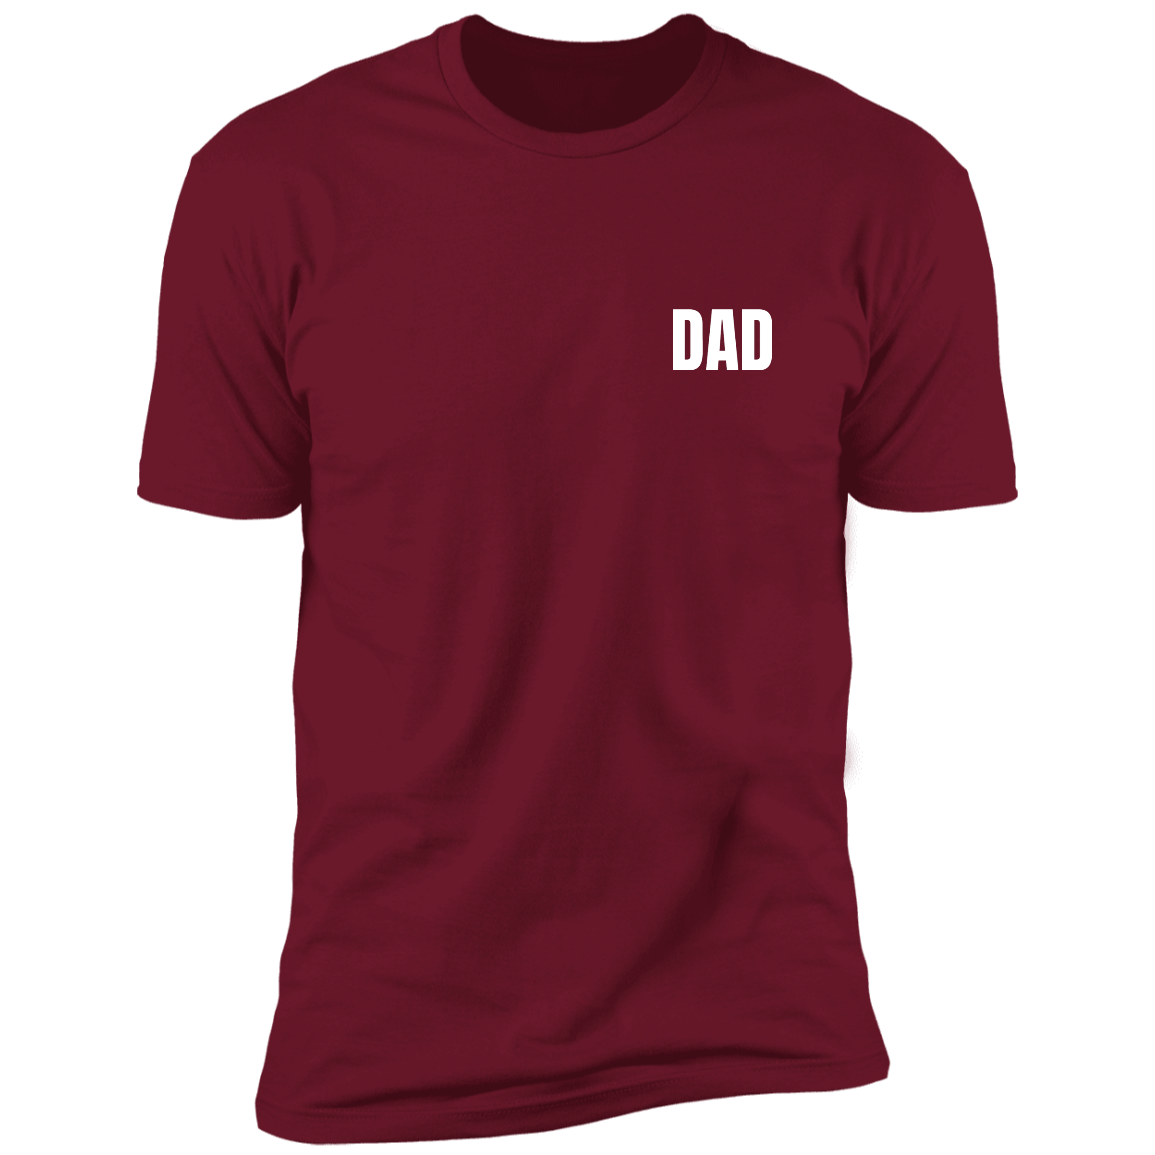 Men's T-Shirt For Dad In Cardinal Color